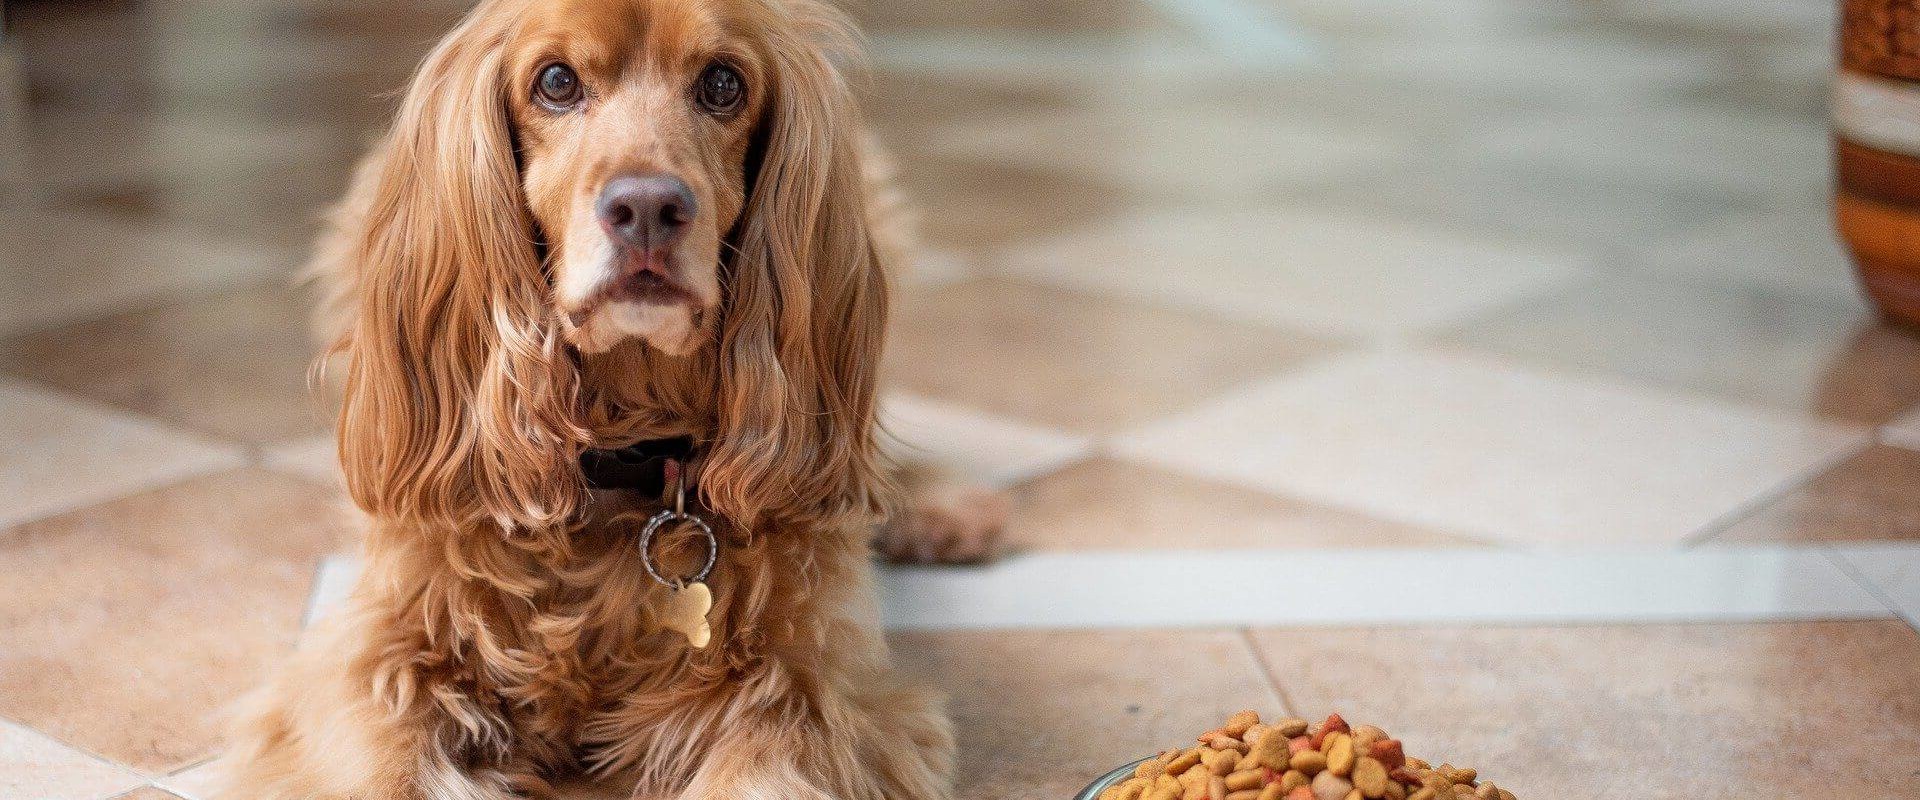 What brand of dog food is making dogs sick?